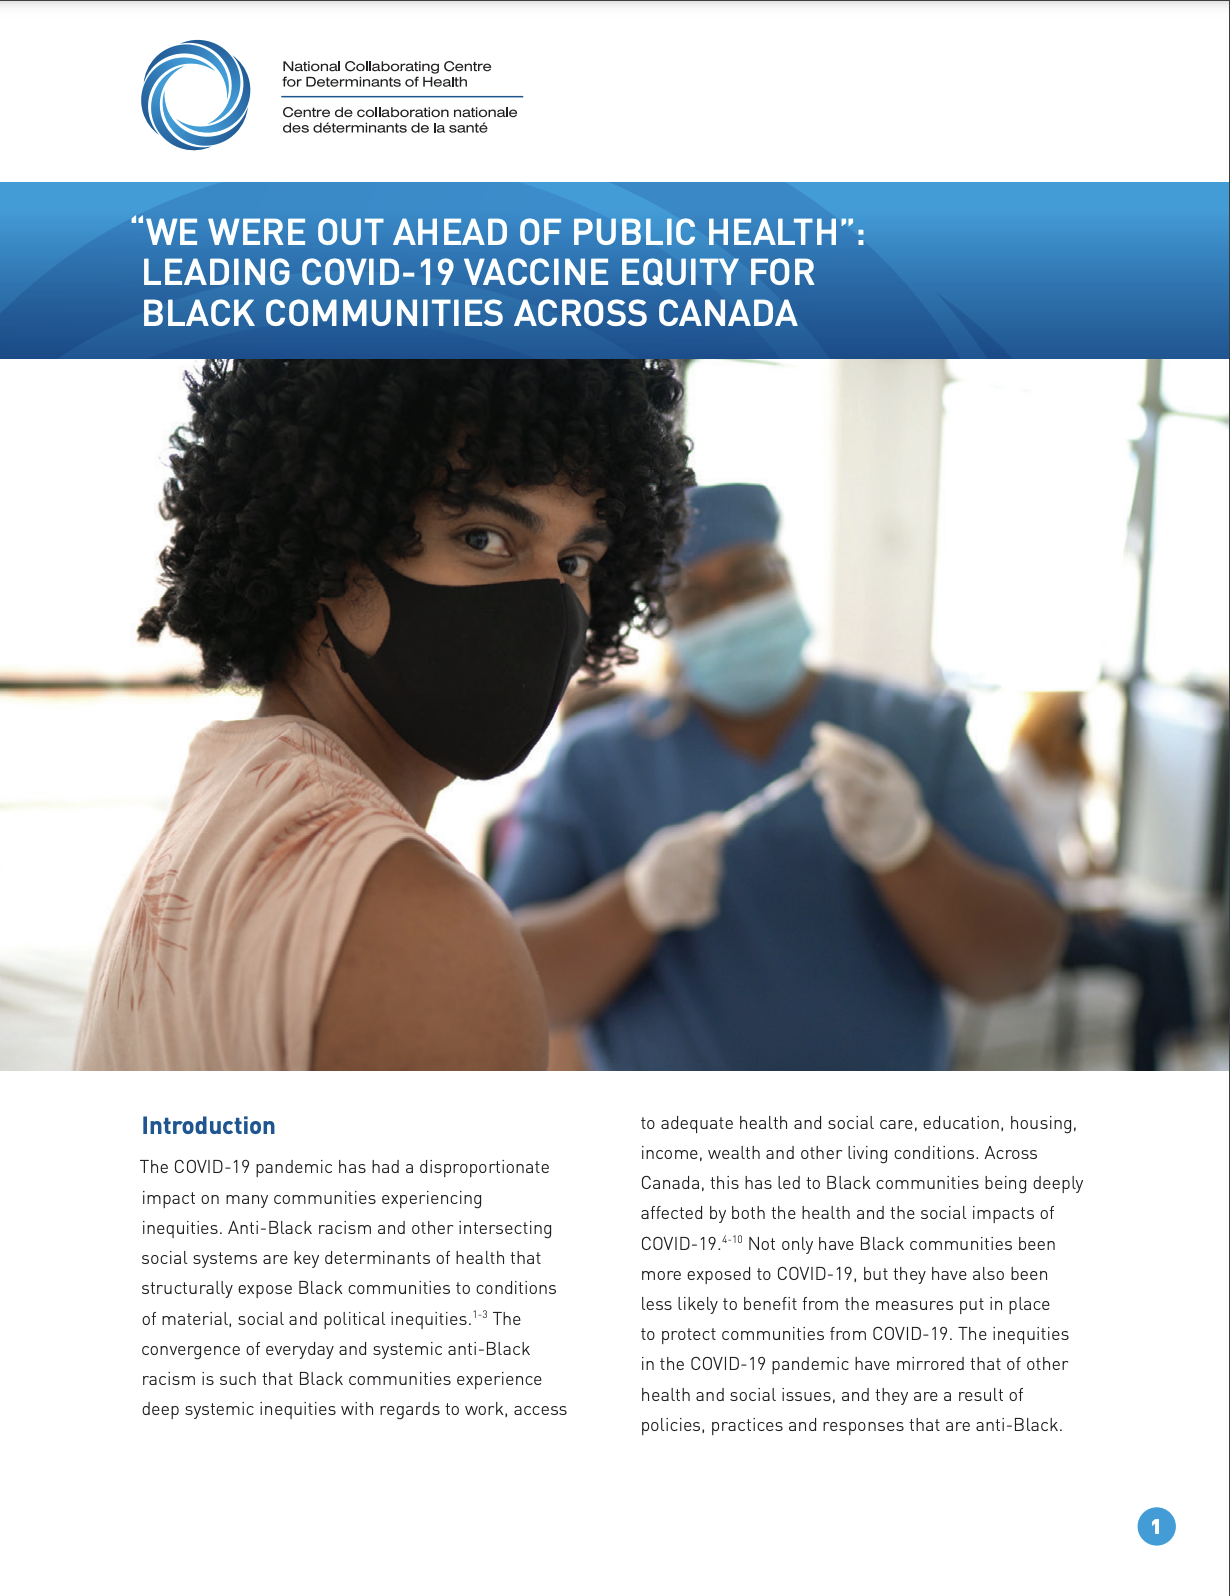 “We were out ahead of public health”: Leading COVID-19 vaccine equity for Black communities across Canada